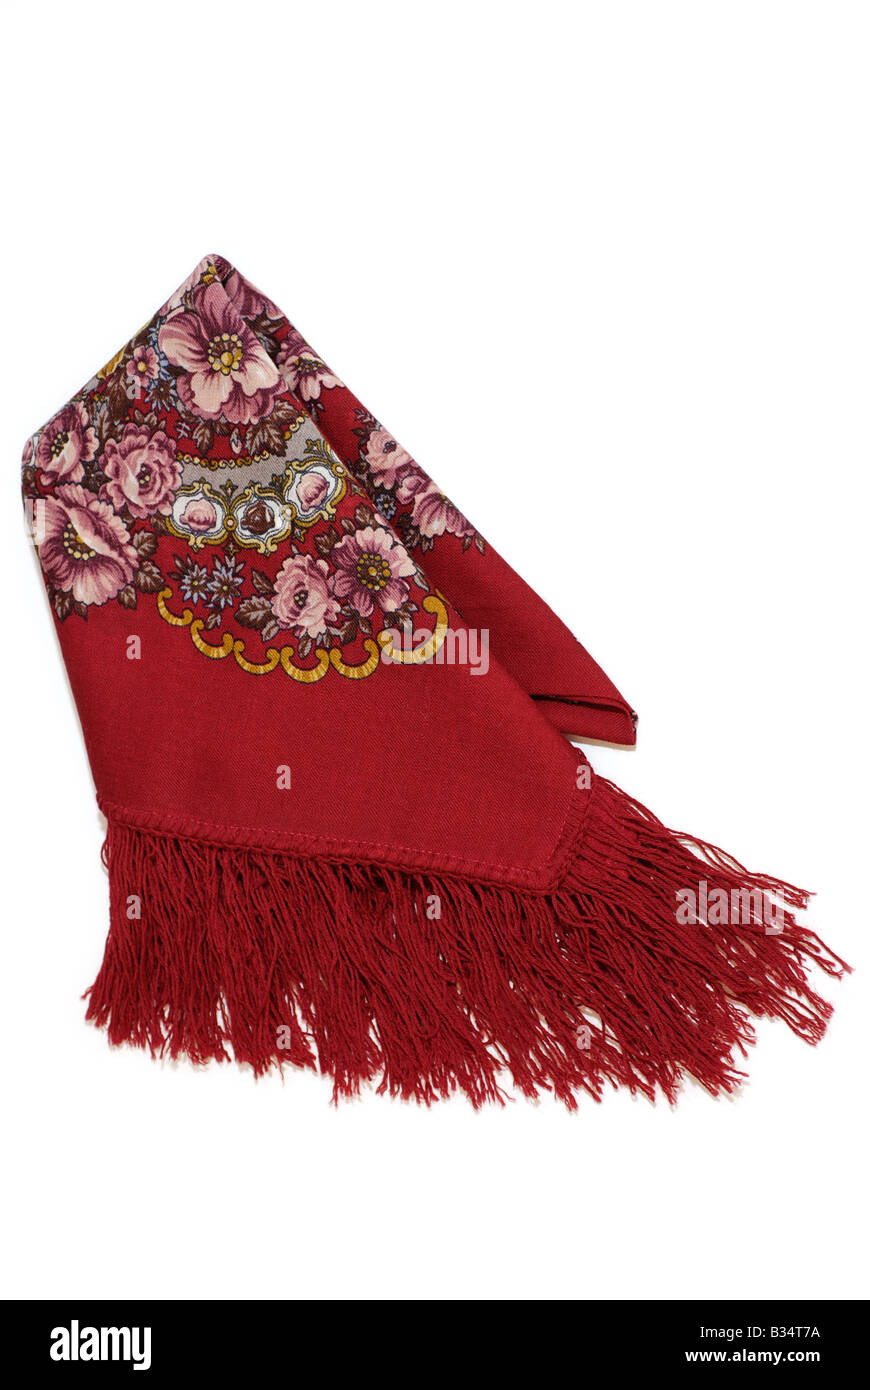 Red Scarf with floral Pattern Stock Photo